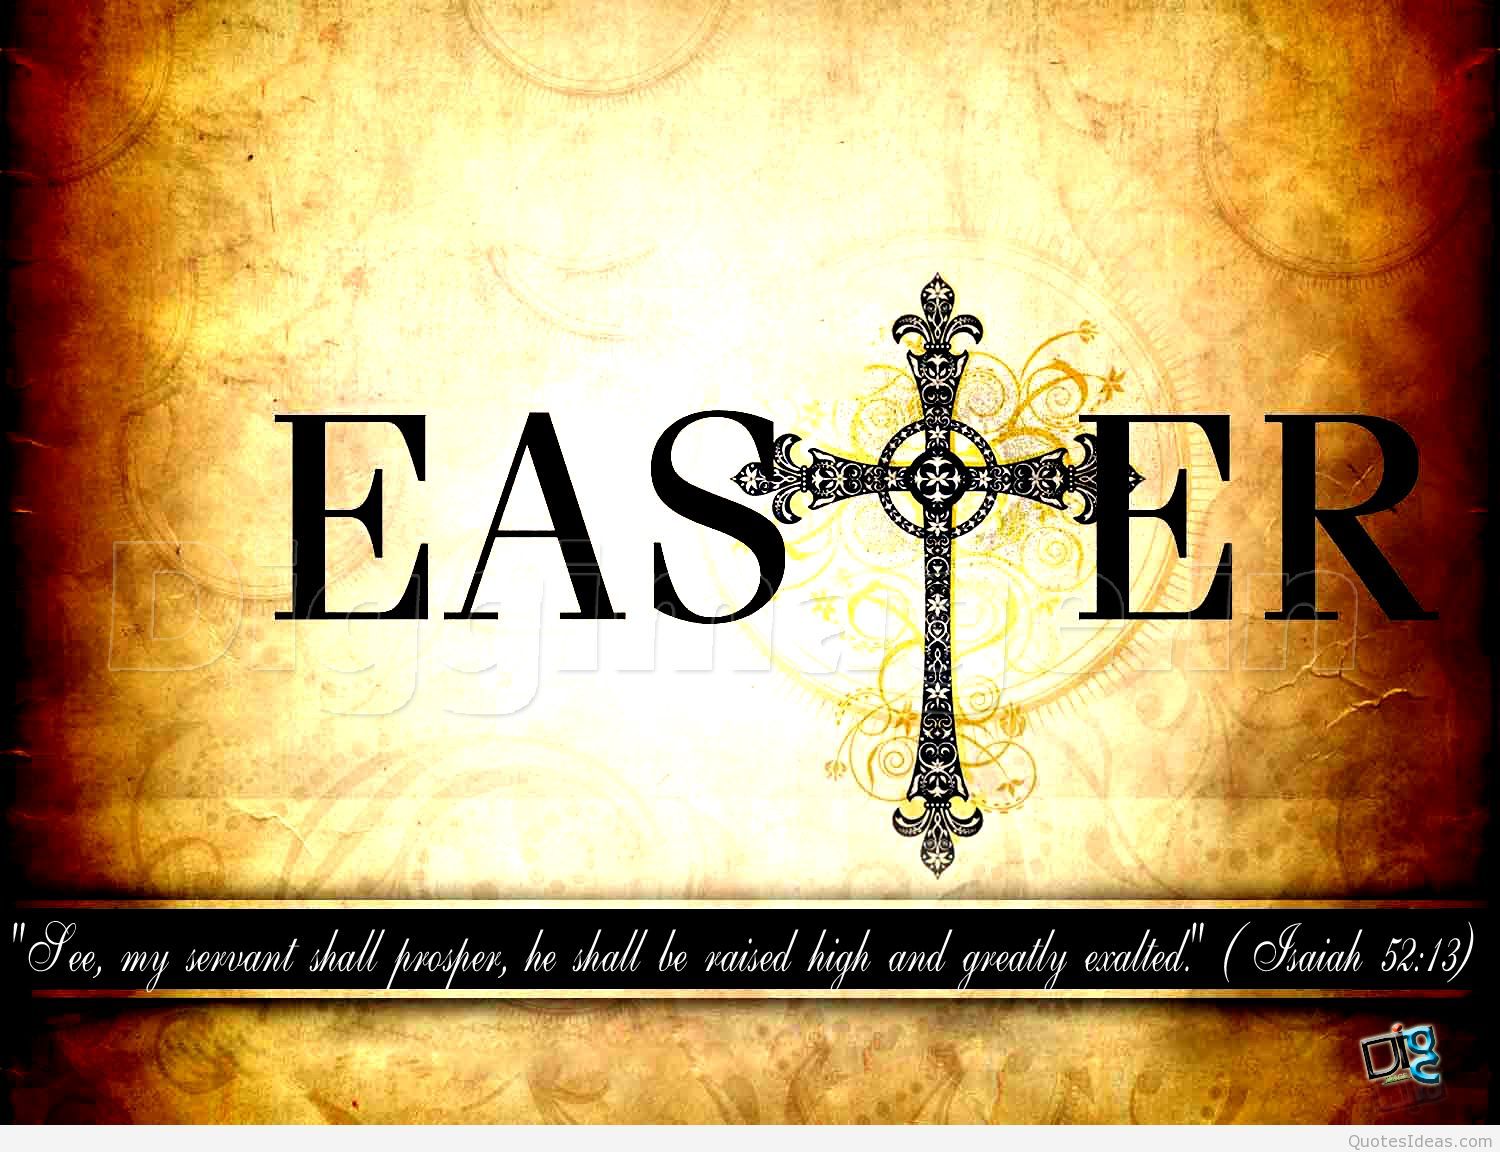 Happy Easter quotes wallpaper 2015